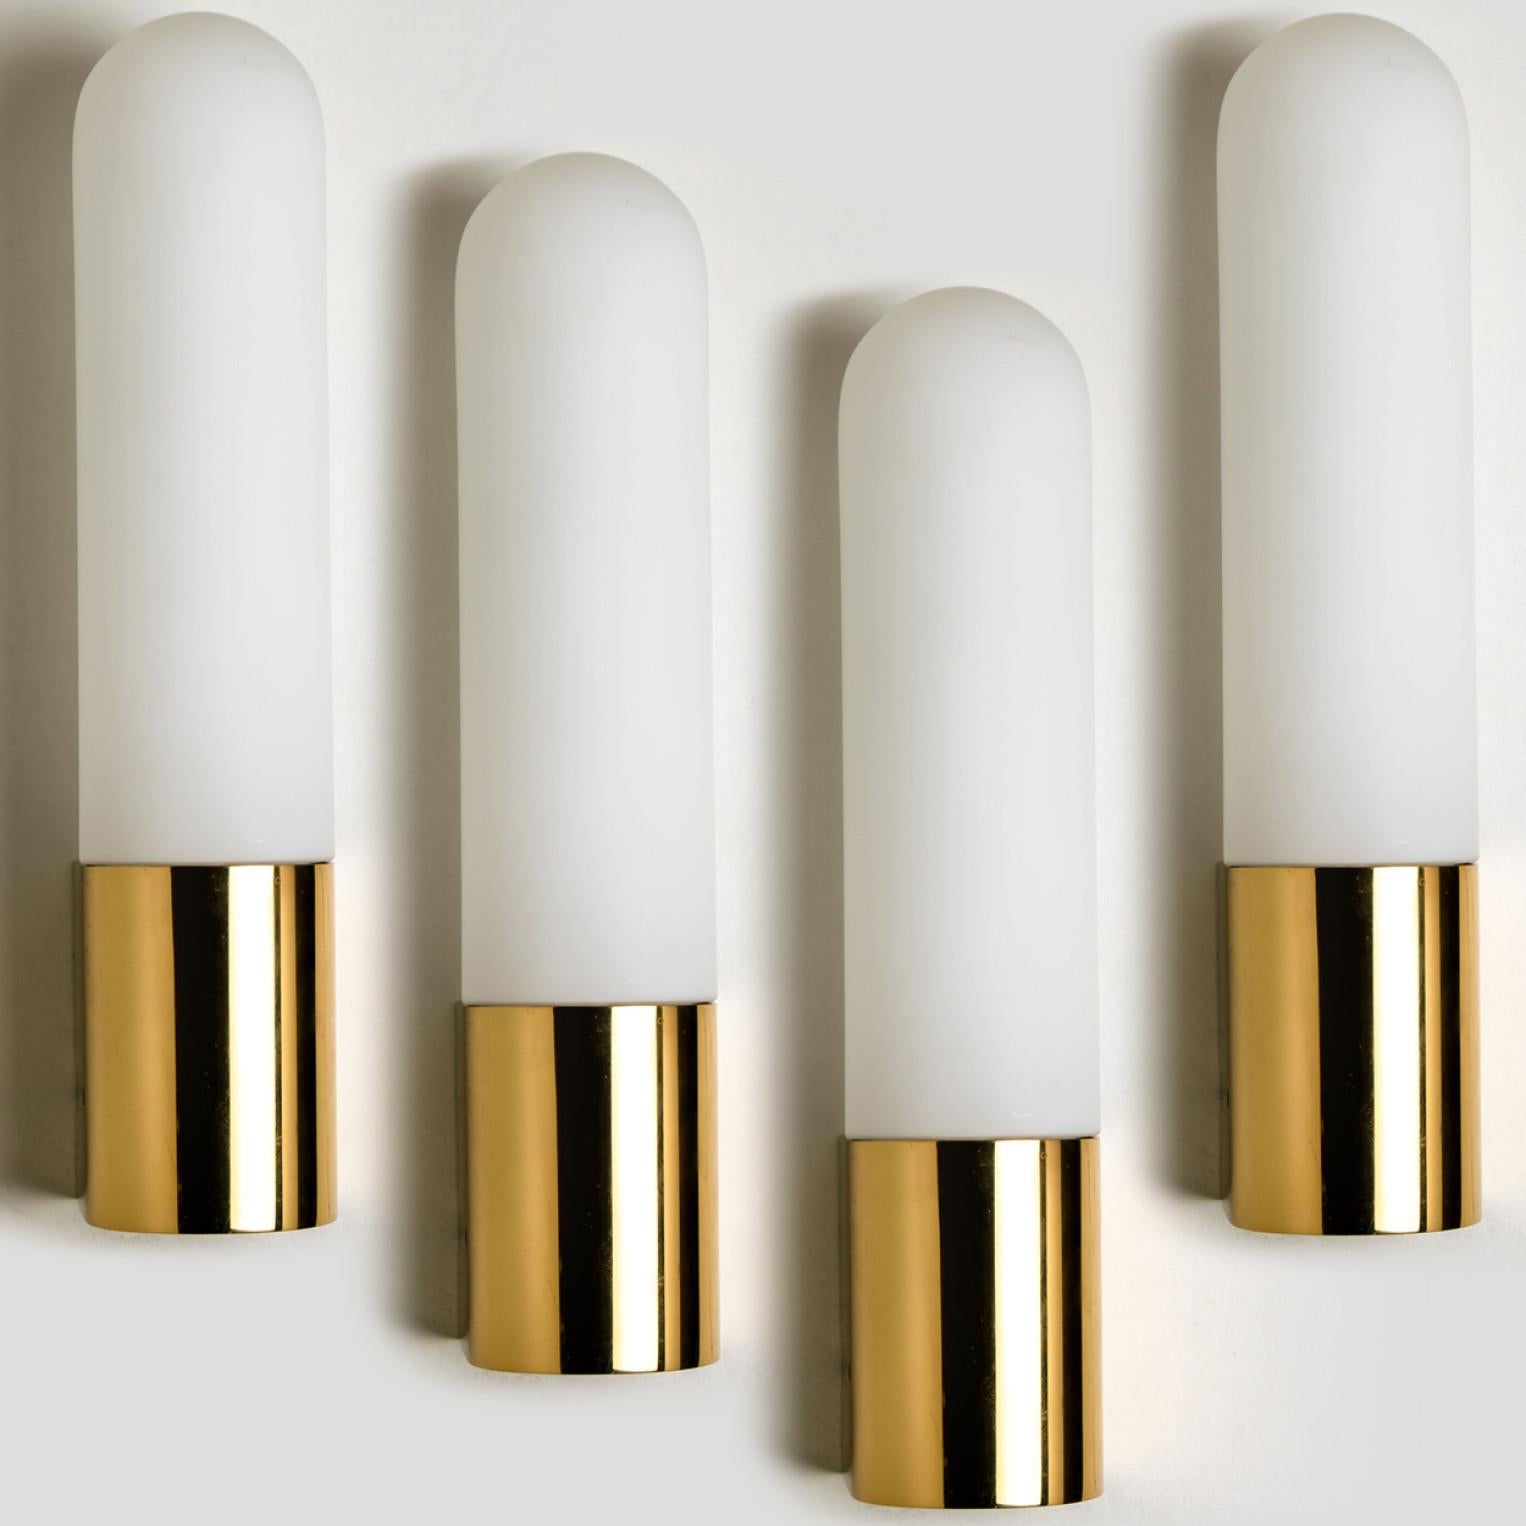 Heavy quality glass lamps with brass base. Beautiful white, opaque glass. Manufactured by the company Glasshütte Limburg, in Germany, Europe around 1970.

This wall light gives a warm light that suits any space.

Please notice the price is for 1